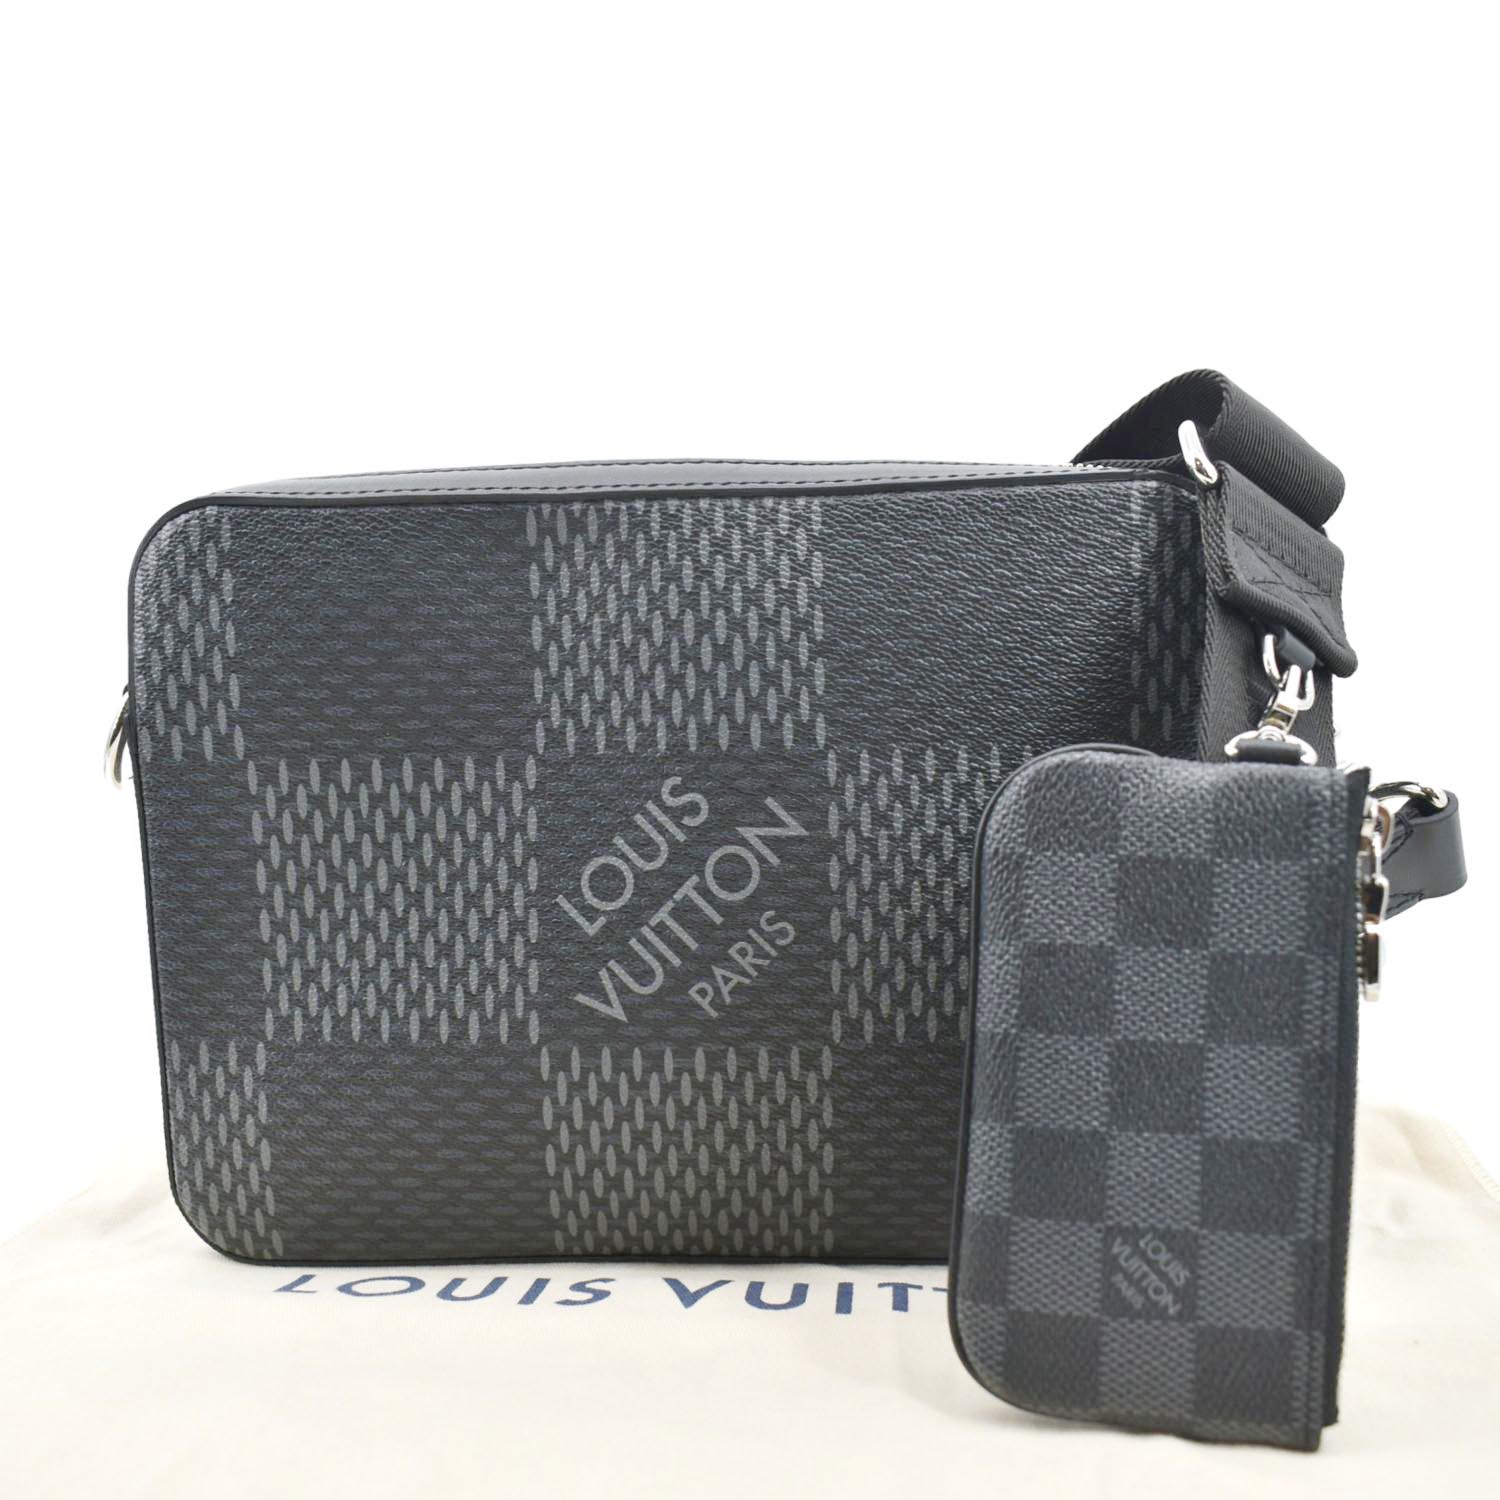 AUTHENTIC/NEW LOUIS VUITTON Alpha Wearable wallet Damier Graphite canvas,  Luxury, Bags & Wallets on Carousell